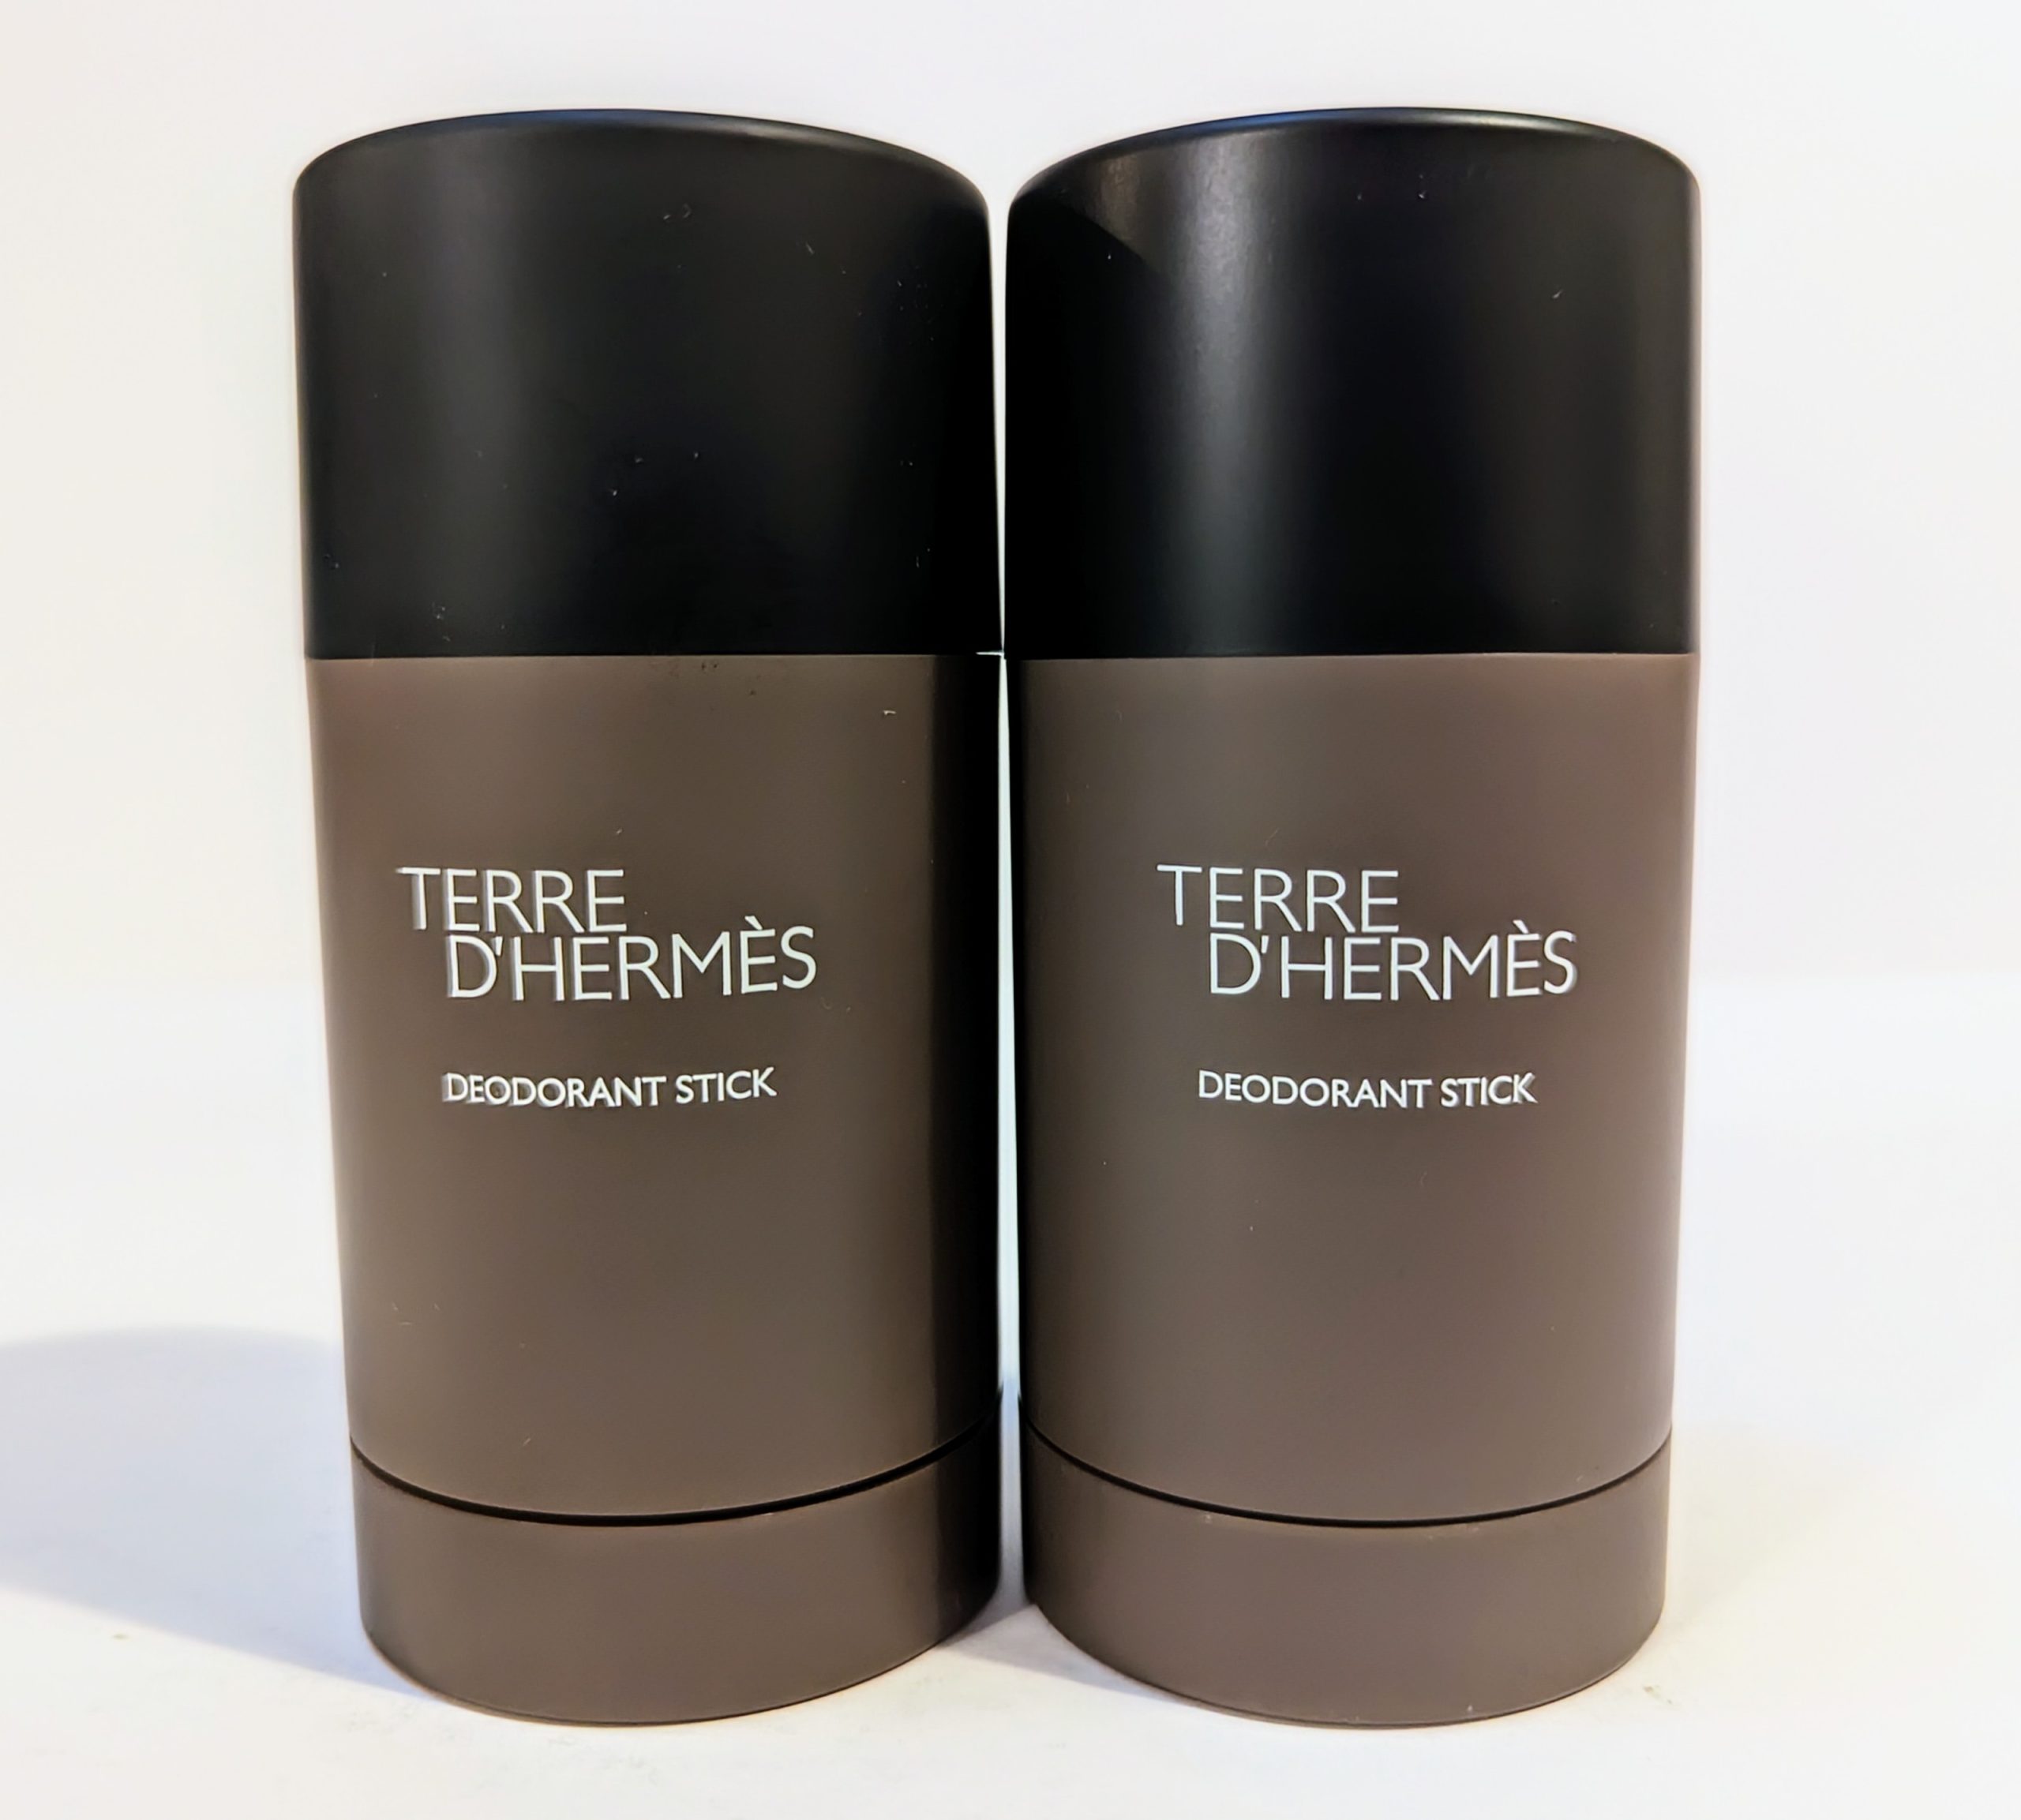 Two Terre d'Hermès deodorant sticks are placed side by side against a white background.